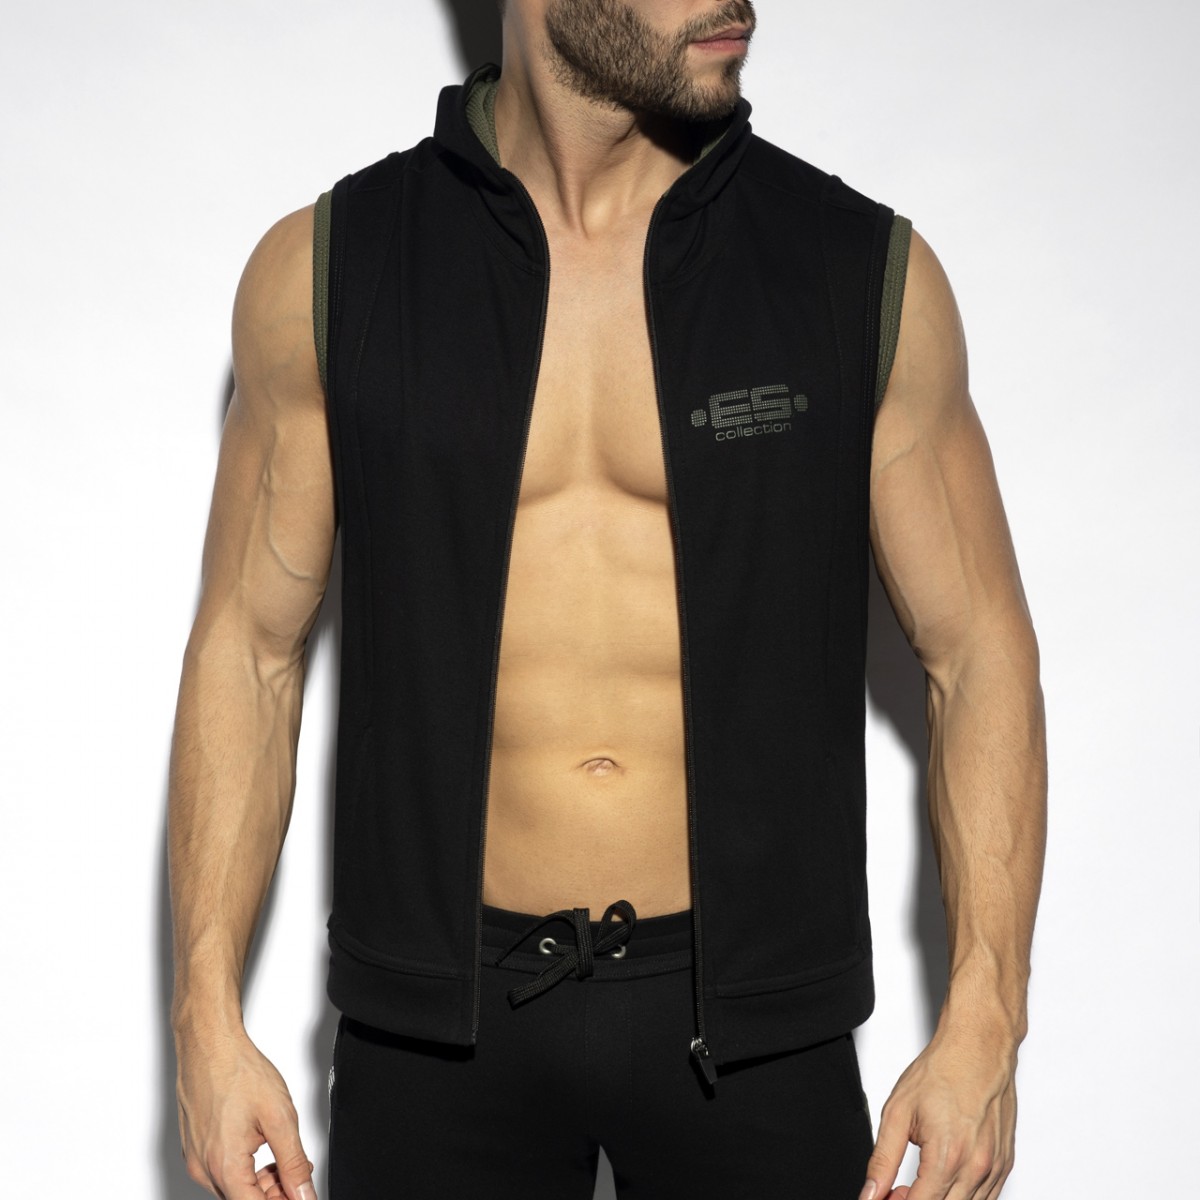 ES Collection First Class Athletic hoodie black